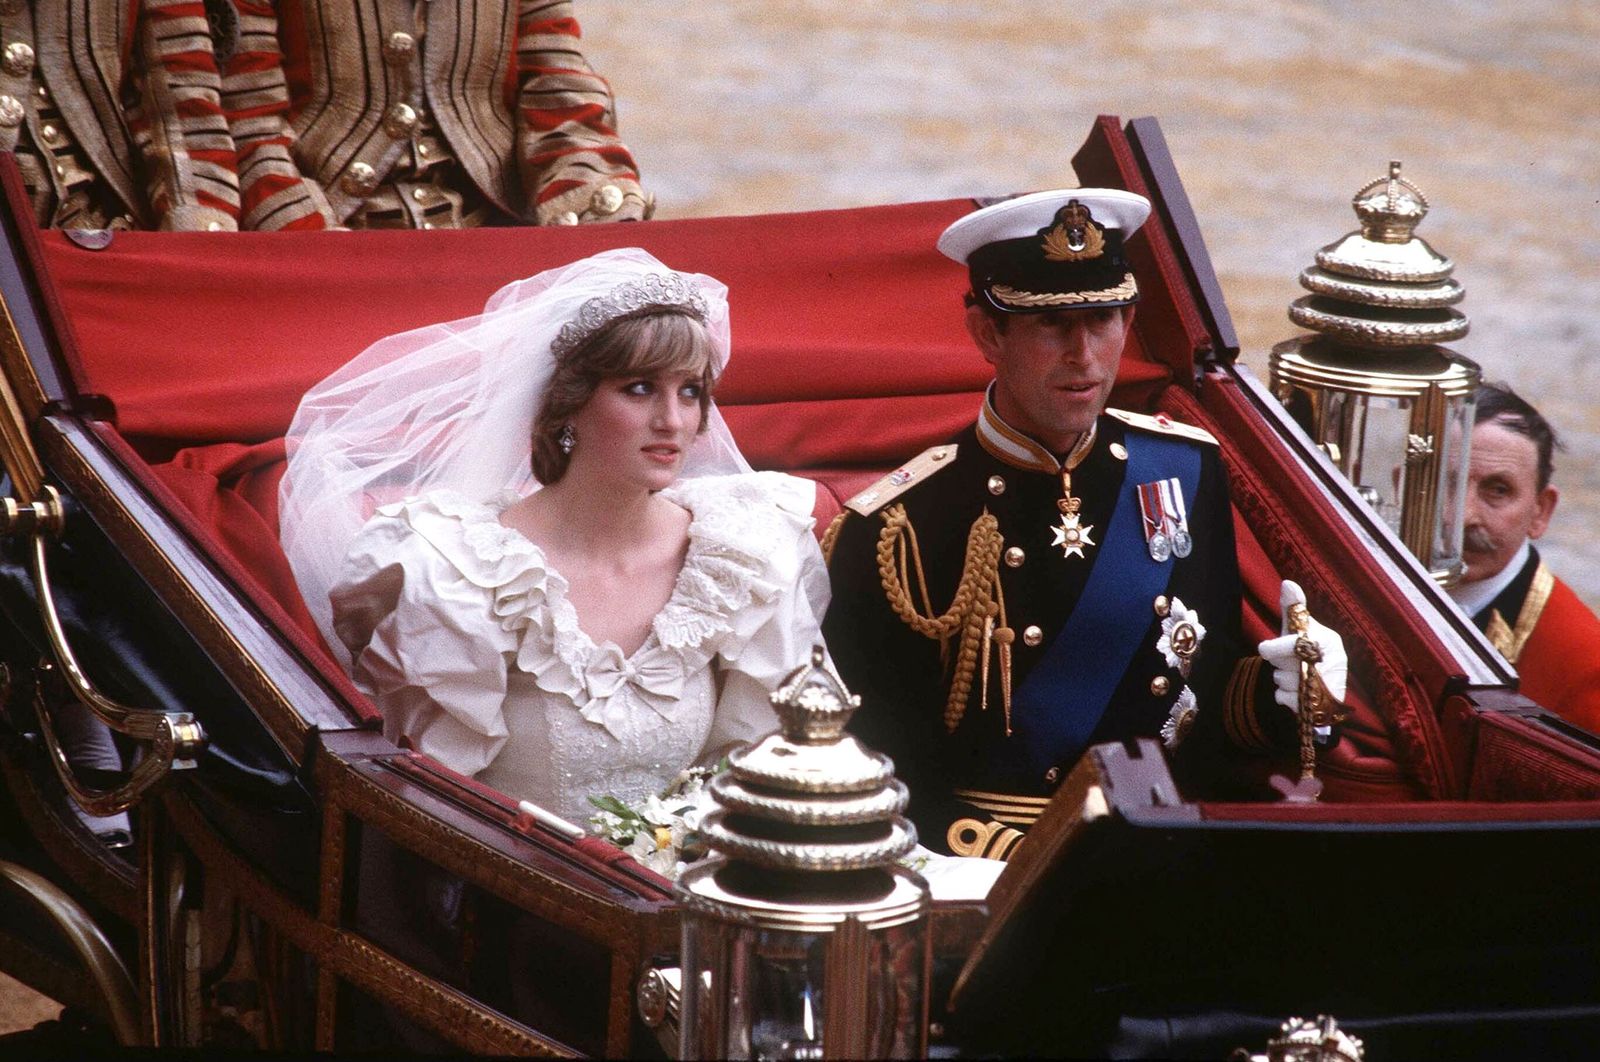 Prince Charles and Princess Diana on the way to Buckingham Palace after their wedding ceremony in London on July 29, 1981 | Photo: Getty Images